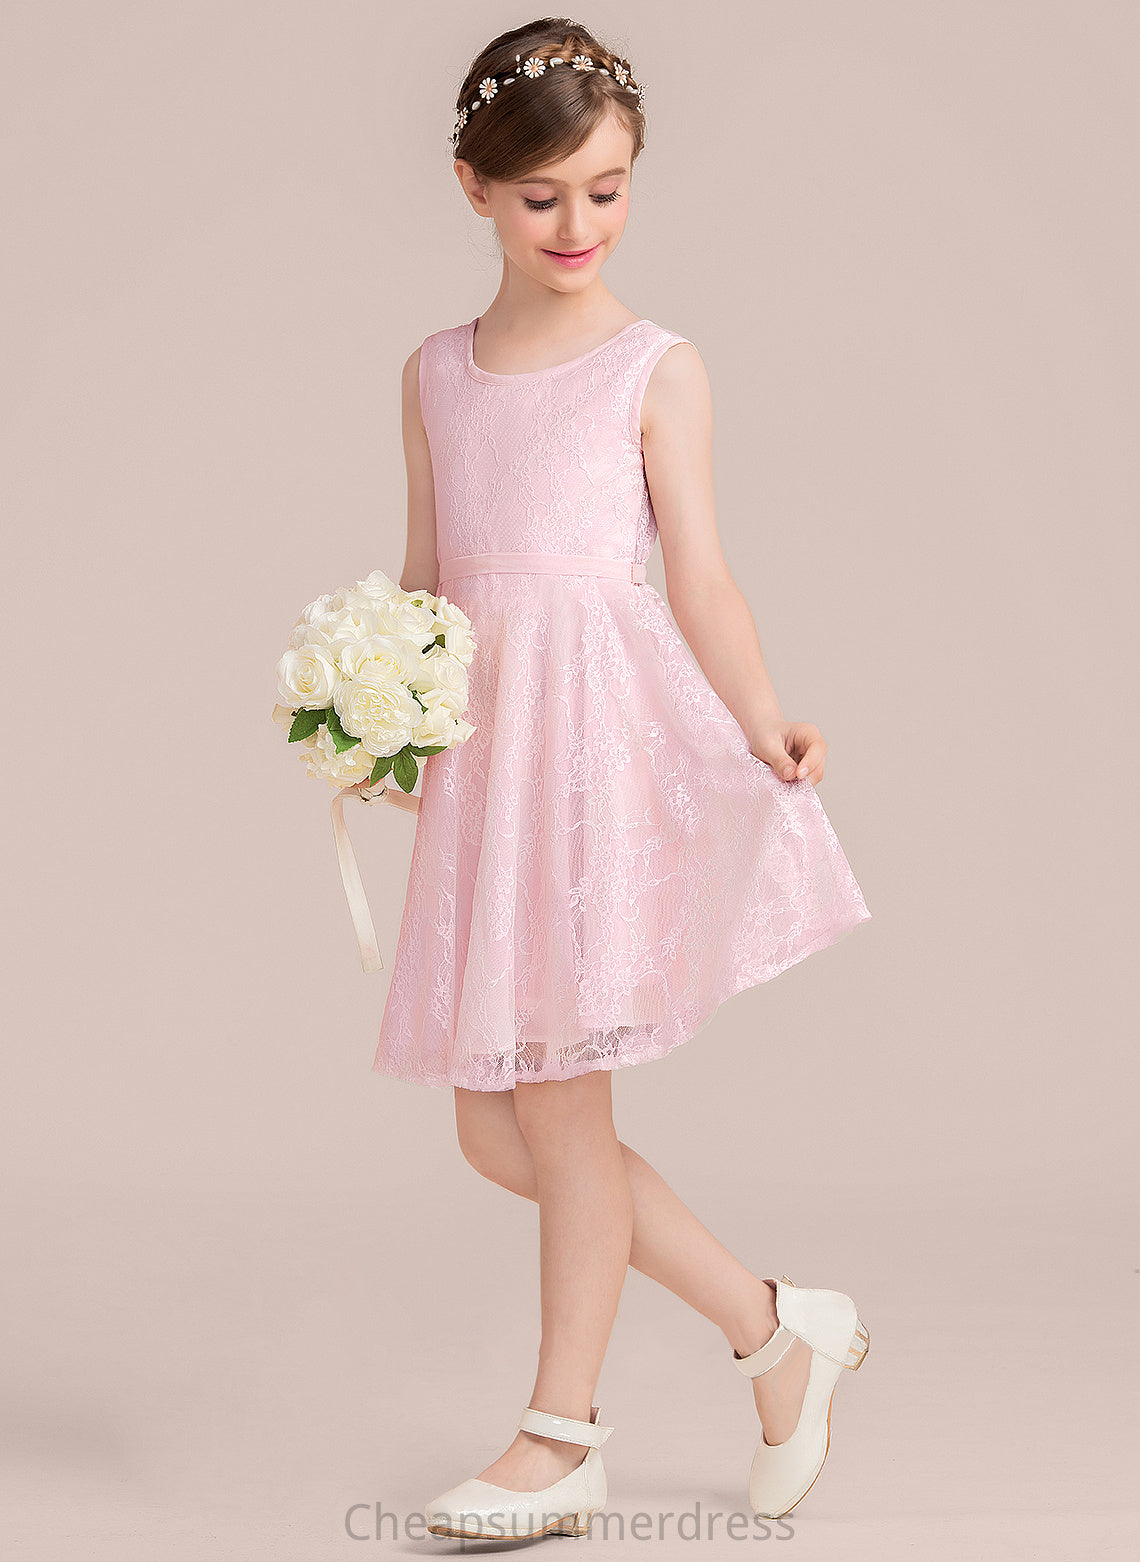 A-Line Bow(s) Sash Dulce Scoop With Neck Lace Knee-Length Junior Bridesmaid Dresses